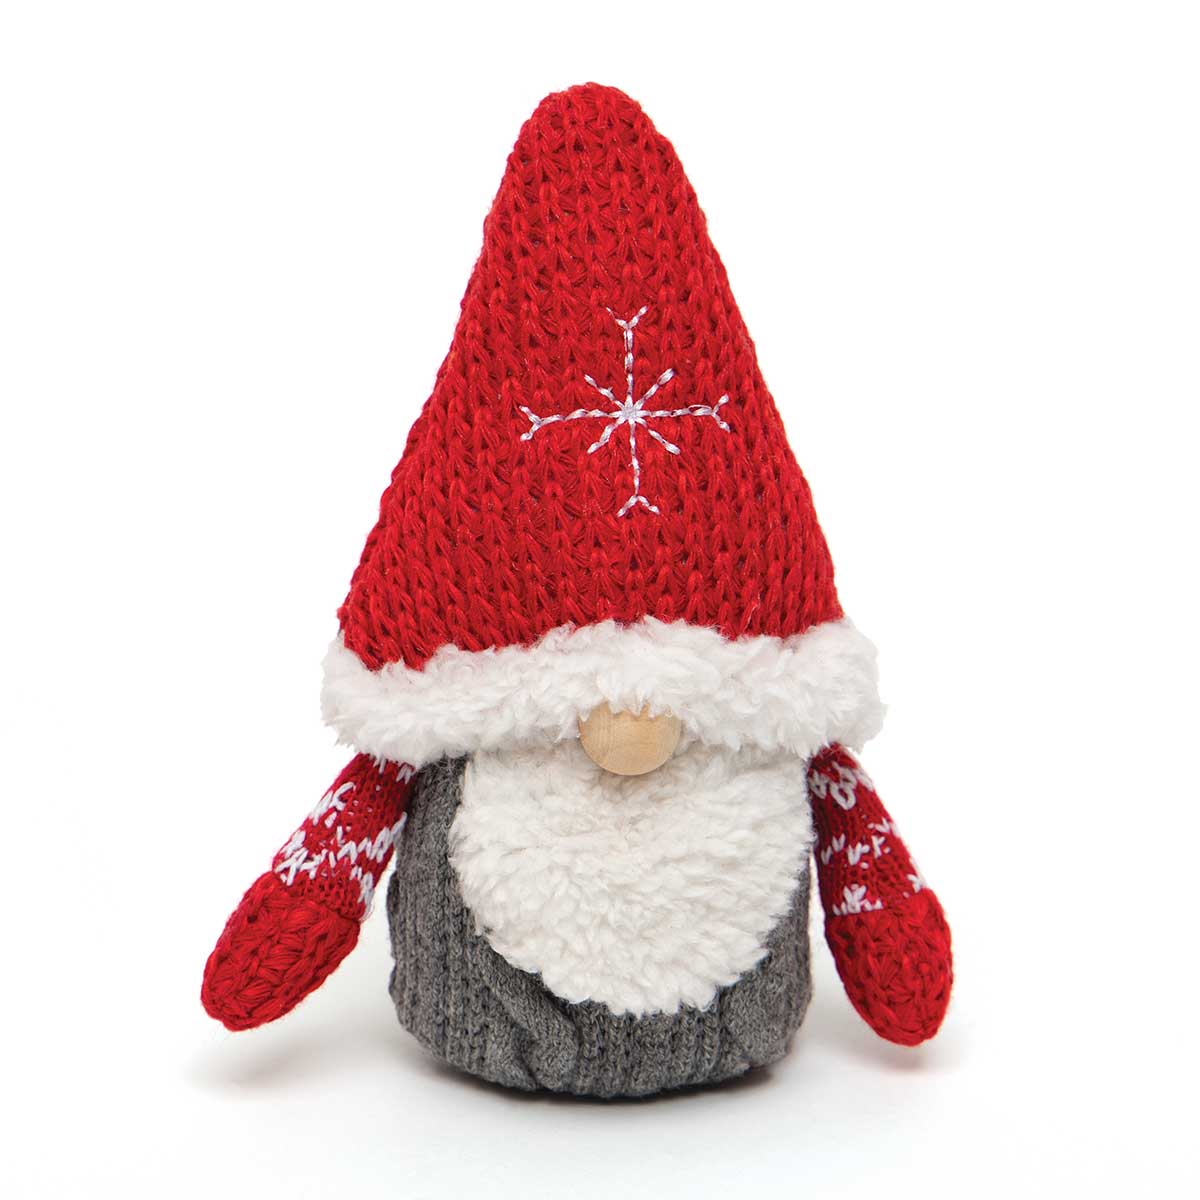 !SWEDE GNOME ORNAMENT RED/GREY WITH SWEATER HAT, WOOD